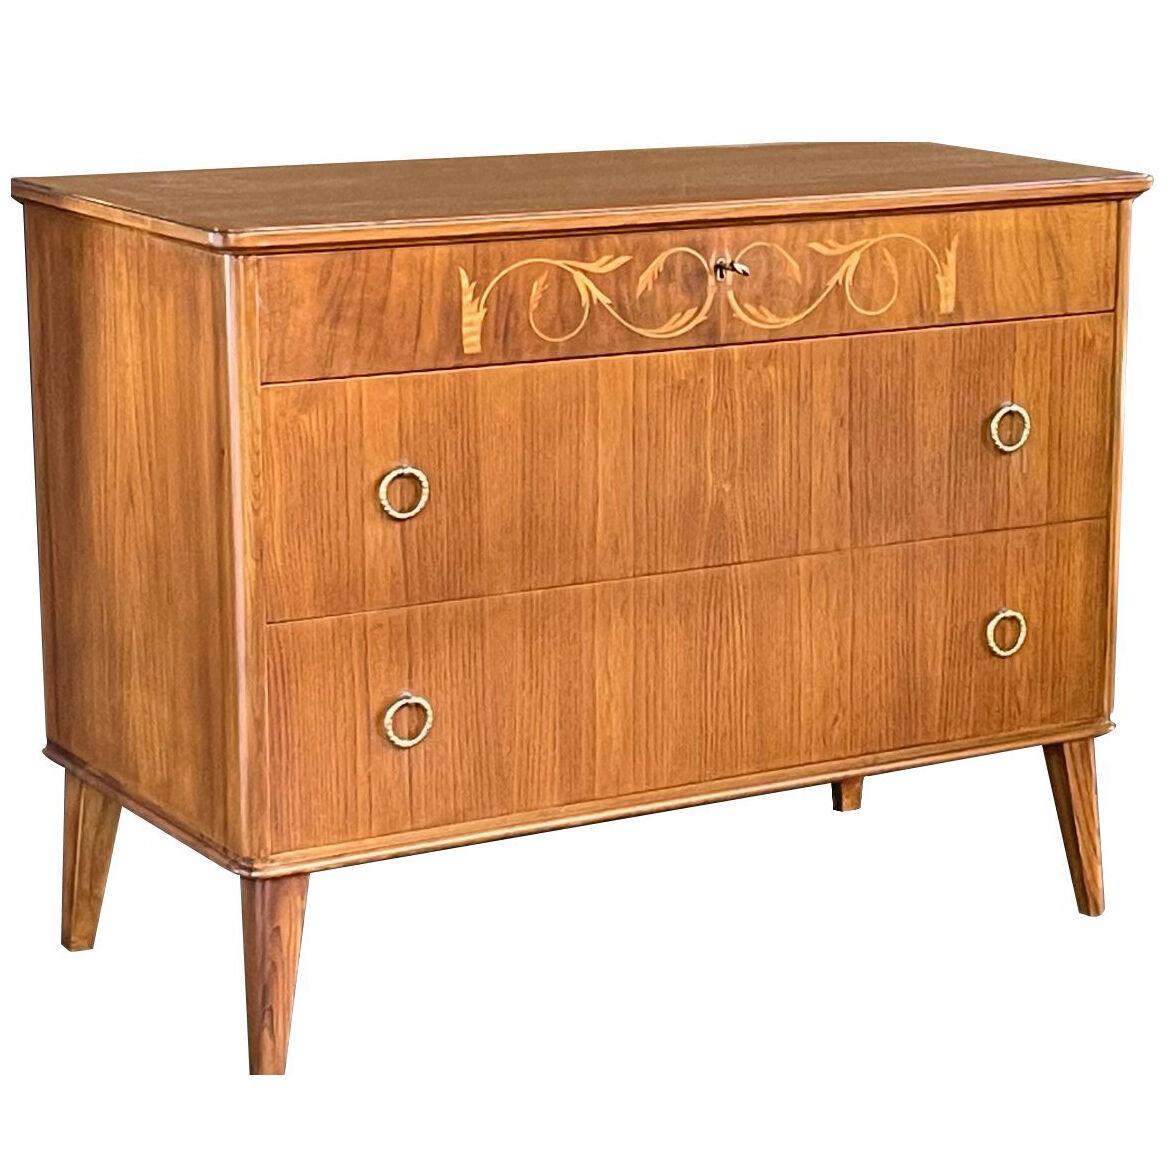 Mid-century modern marquetry inlaid birch chest of drawers; possibly Swedish